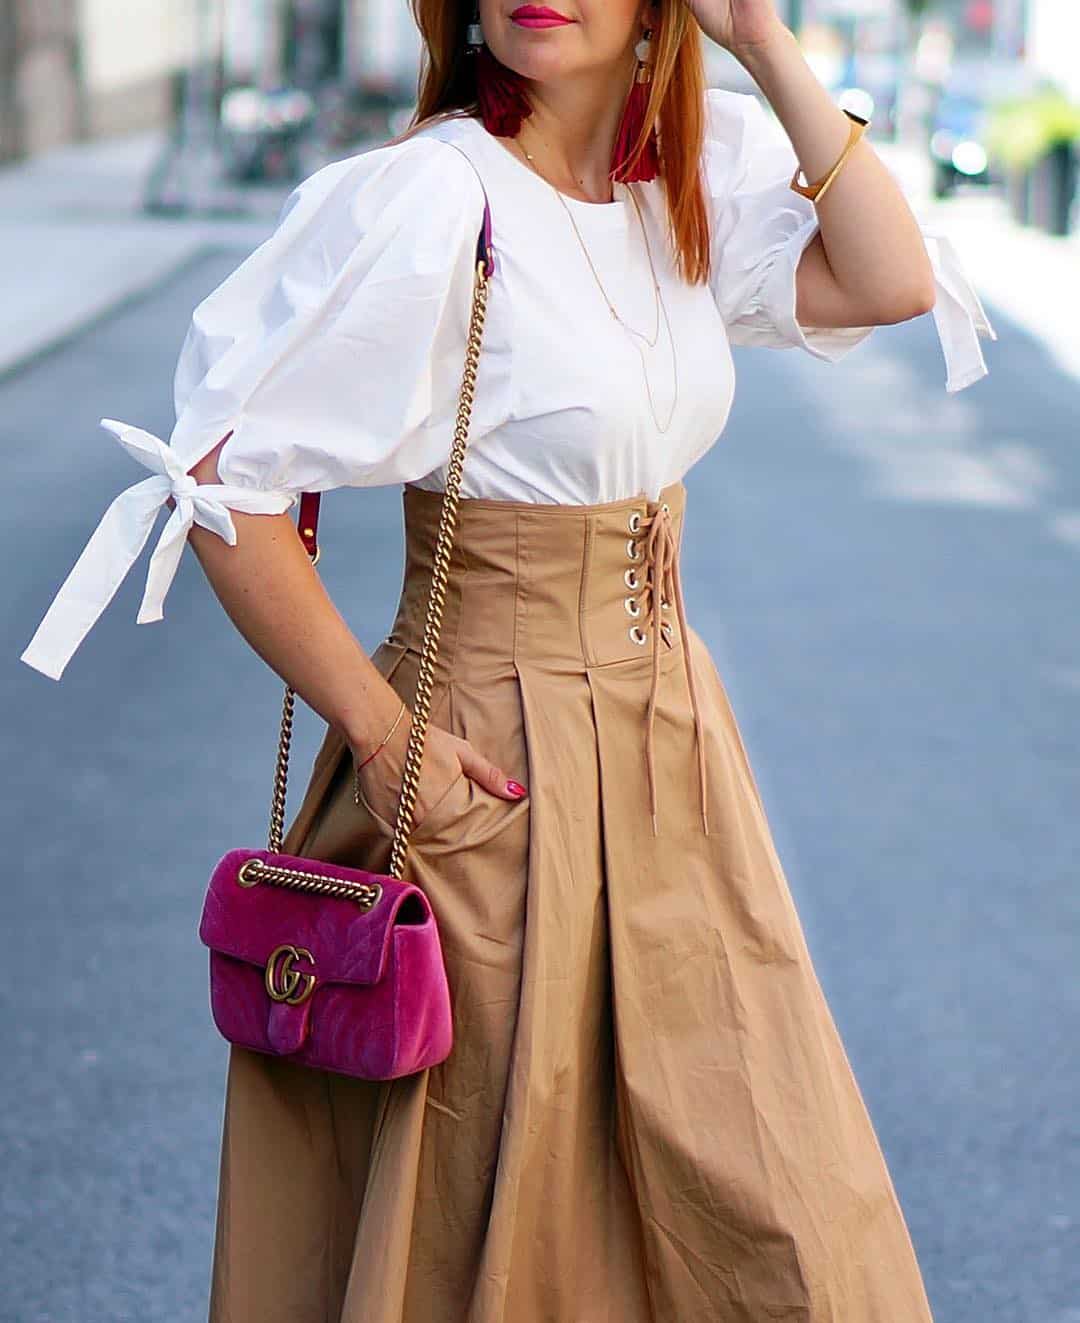 lace up skirt outfits